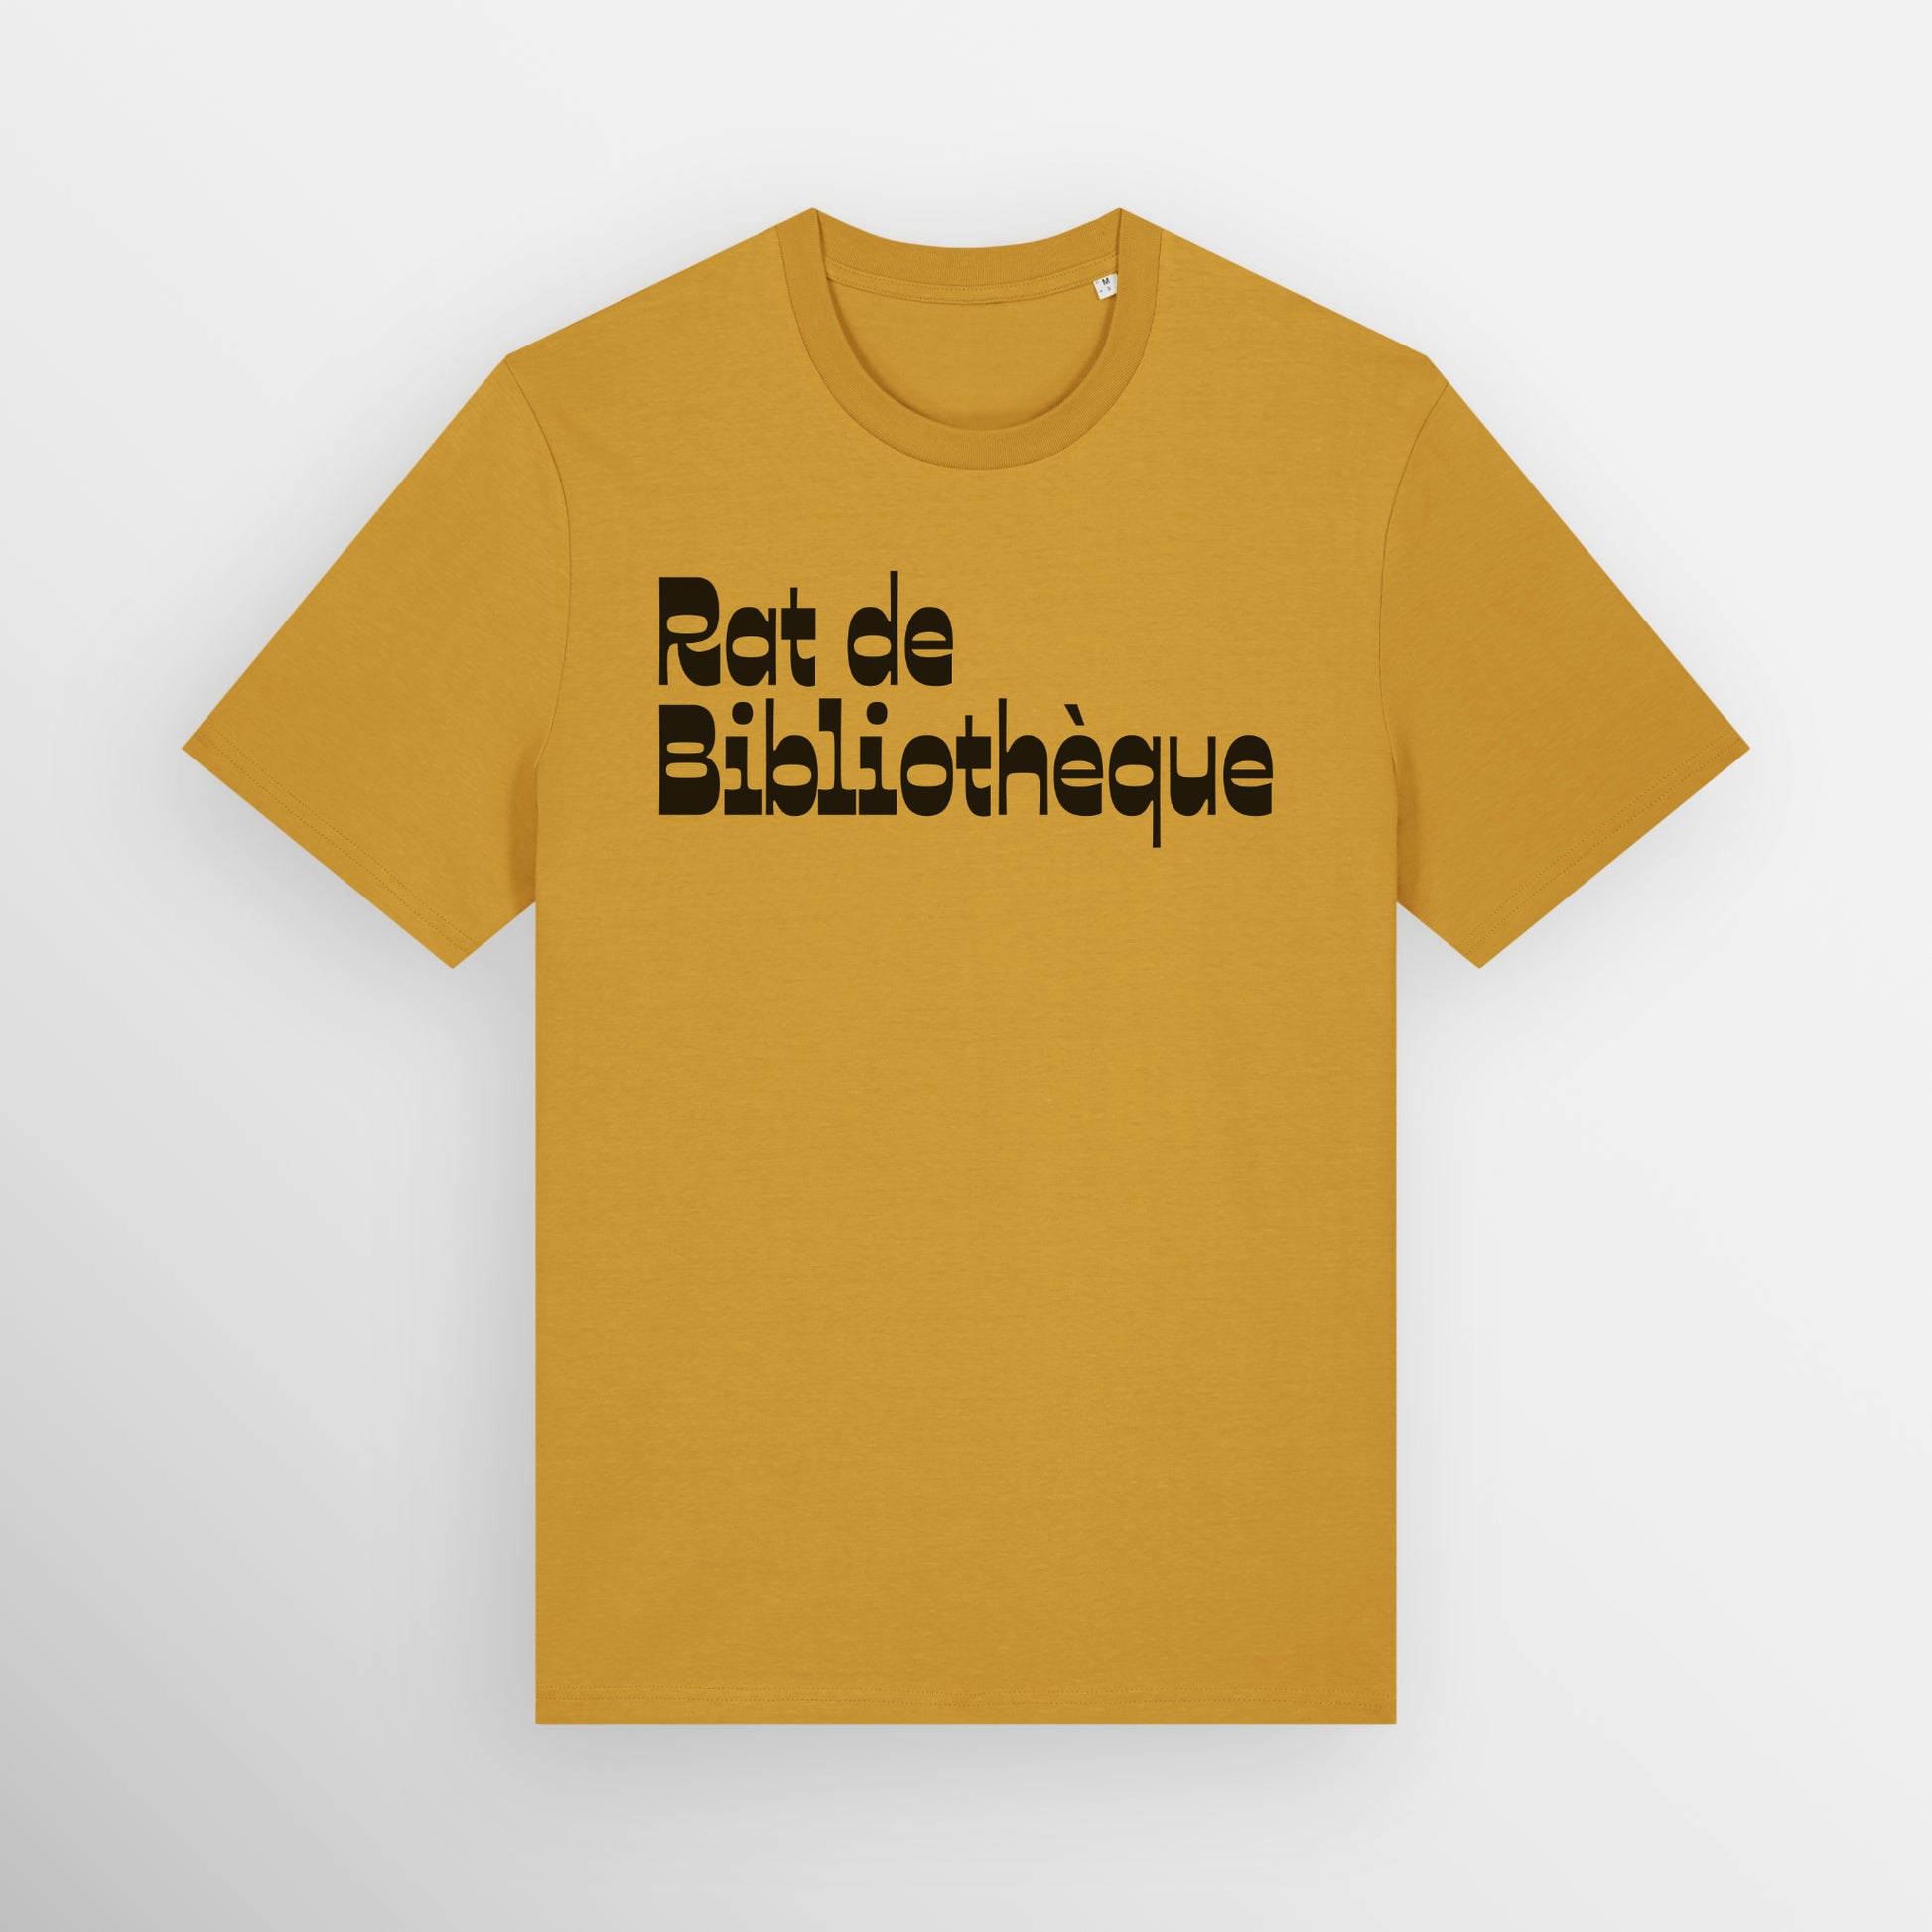 Ochre coloured regular fit t-shirt with Rat de Bibliothèque written on the front in black, which is French for bookworm.